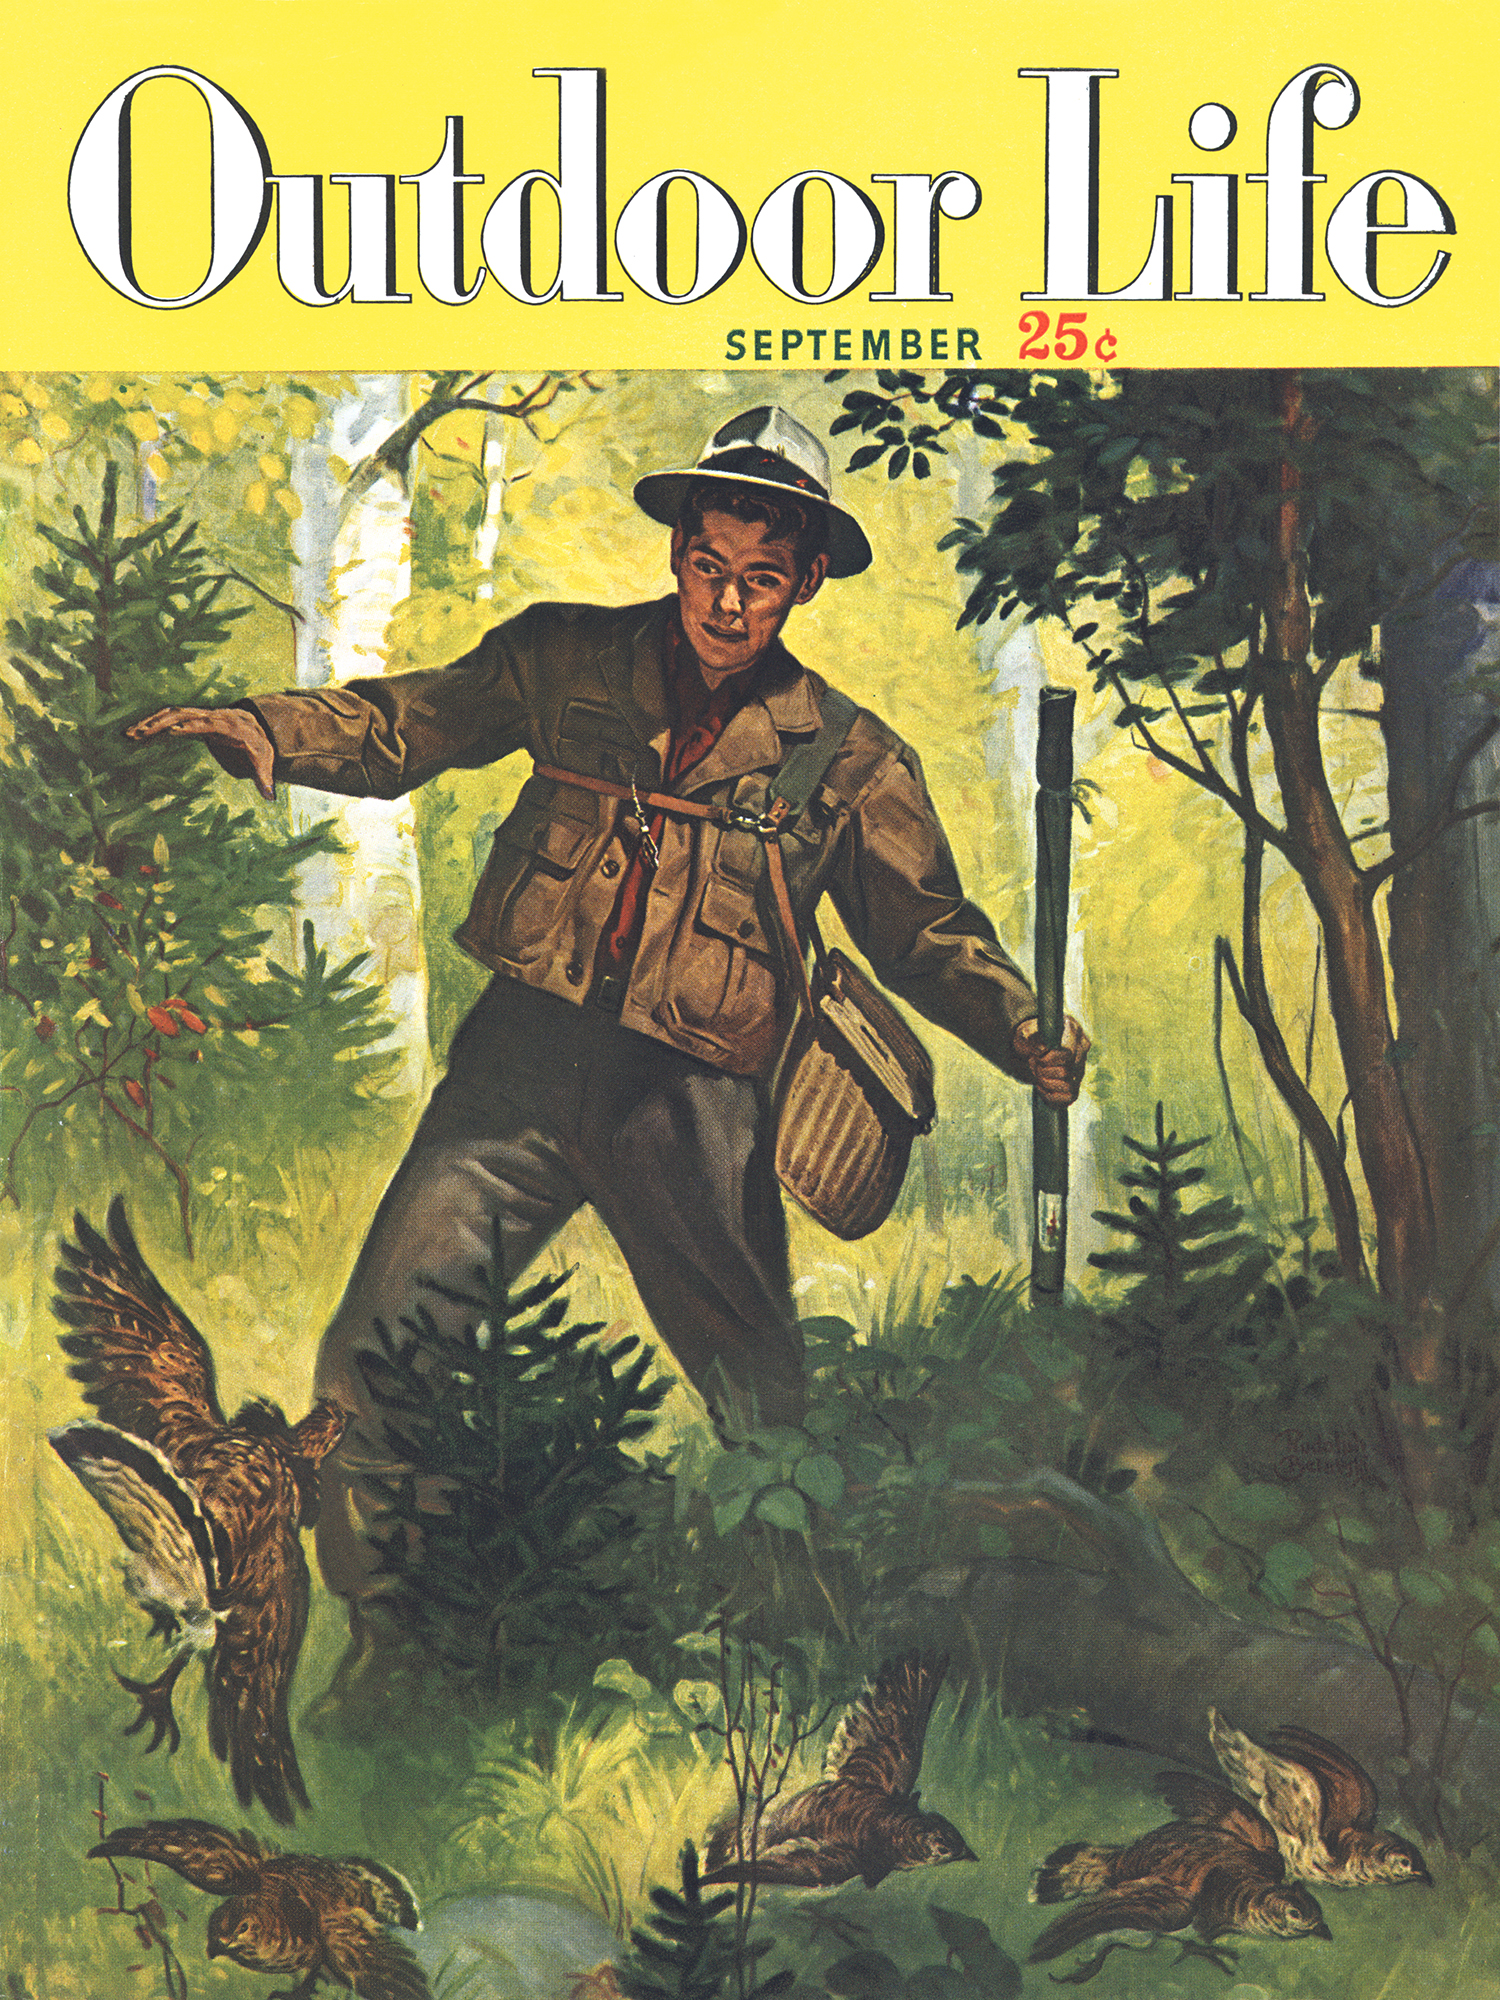 September 1949 cover of Outdoor Life magazine